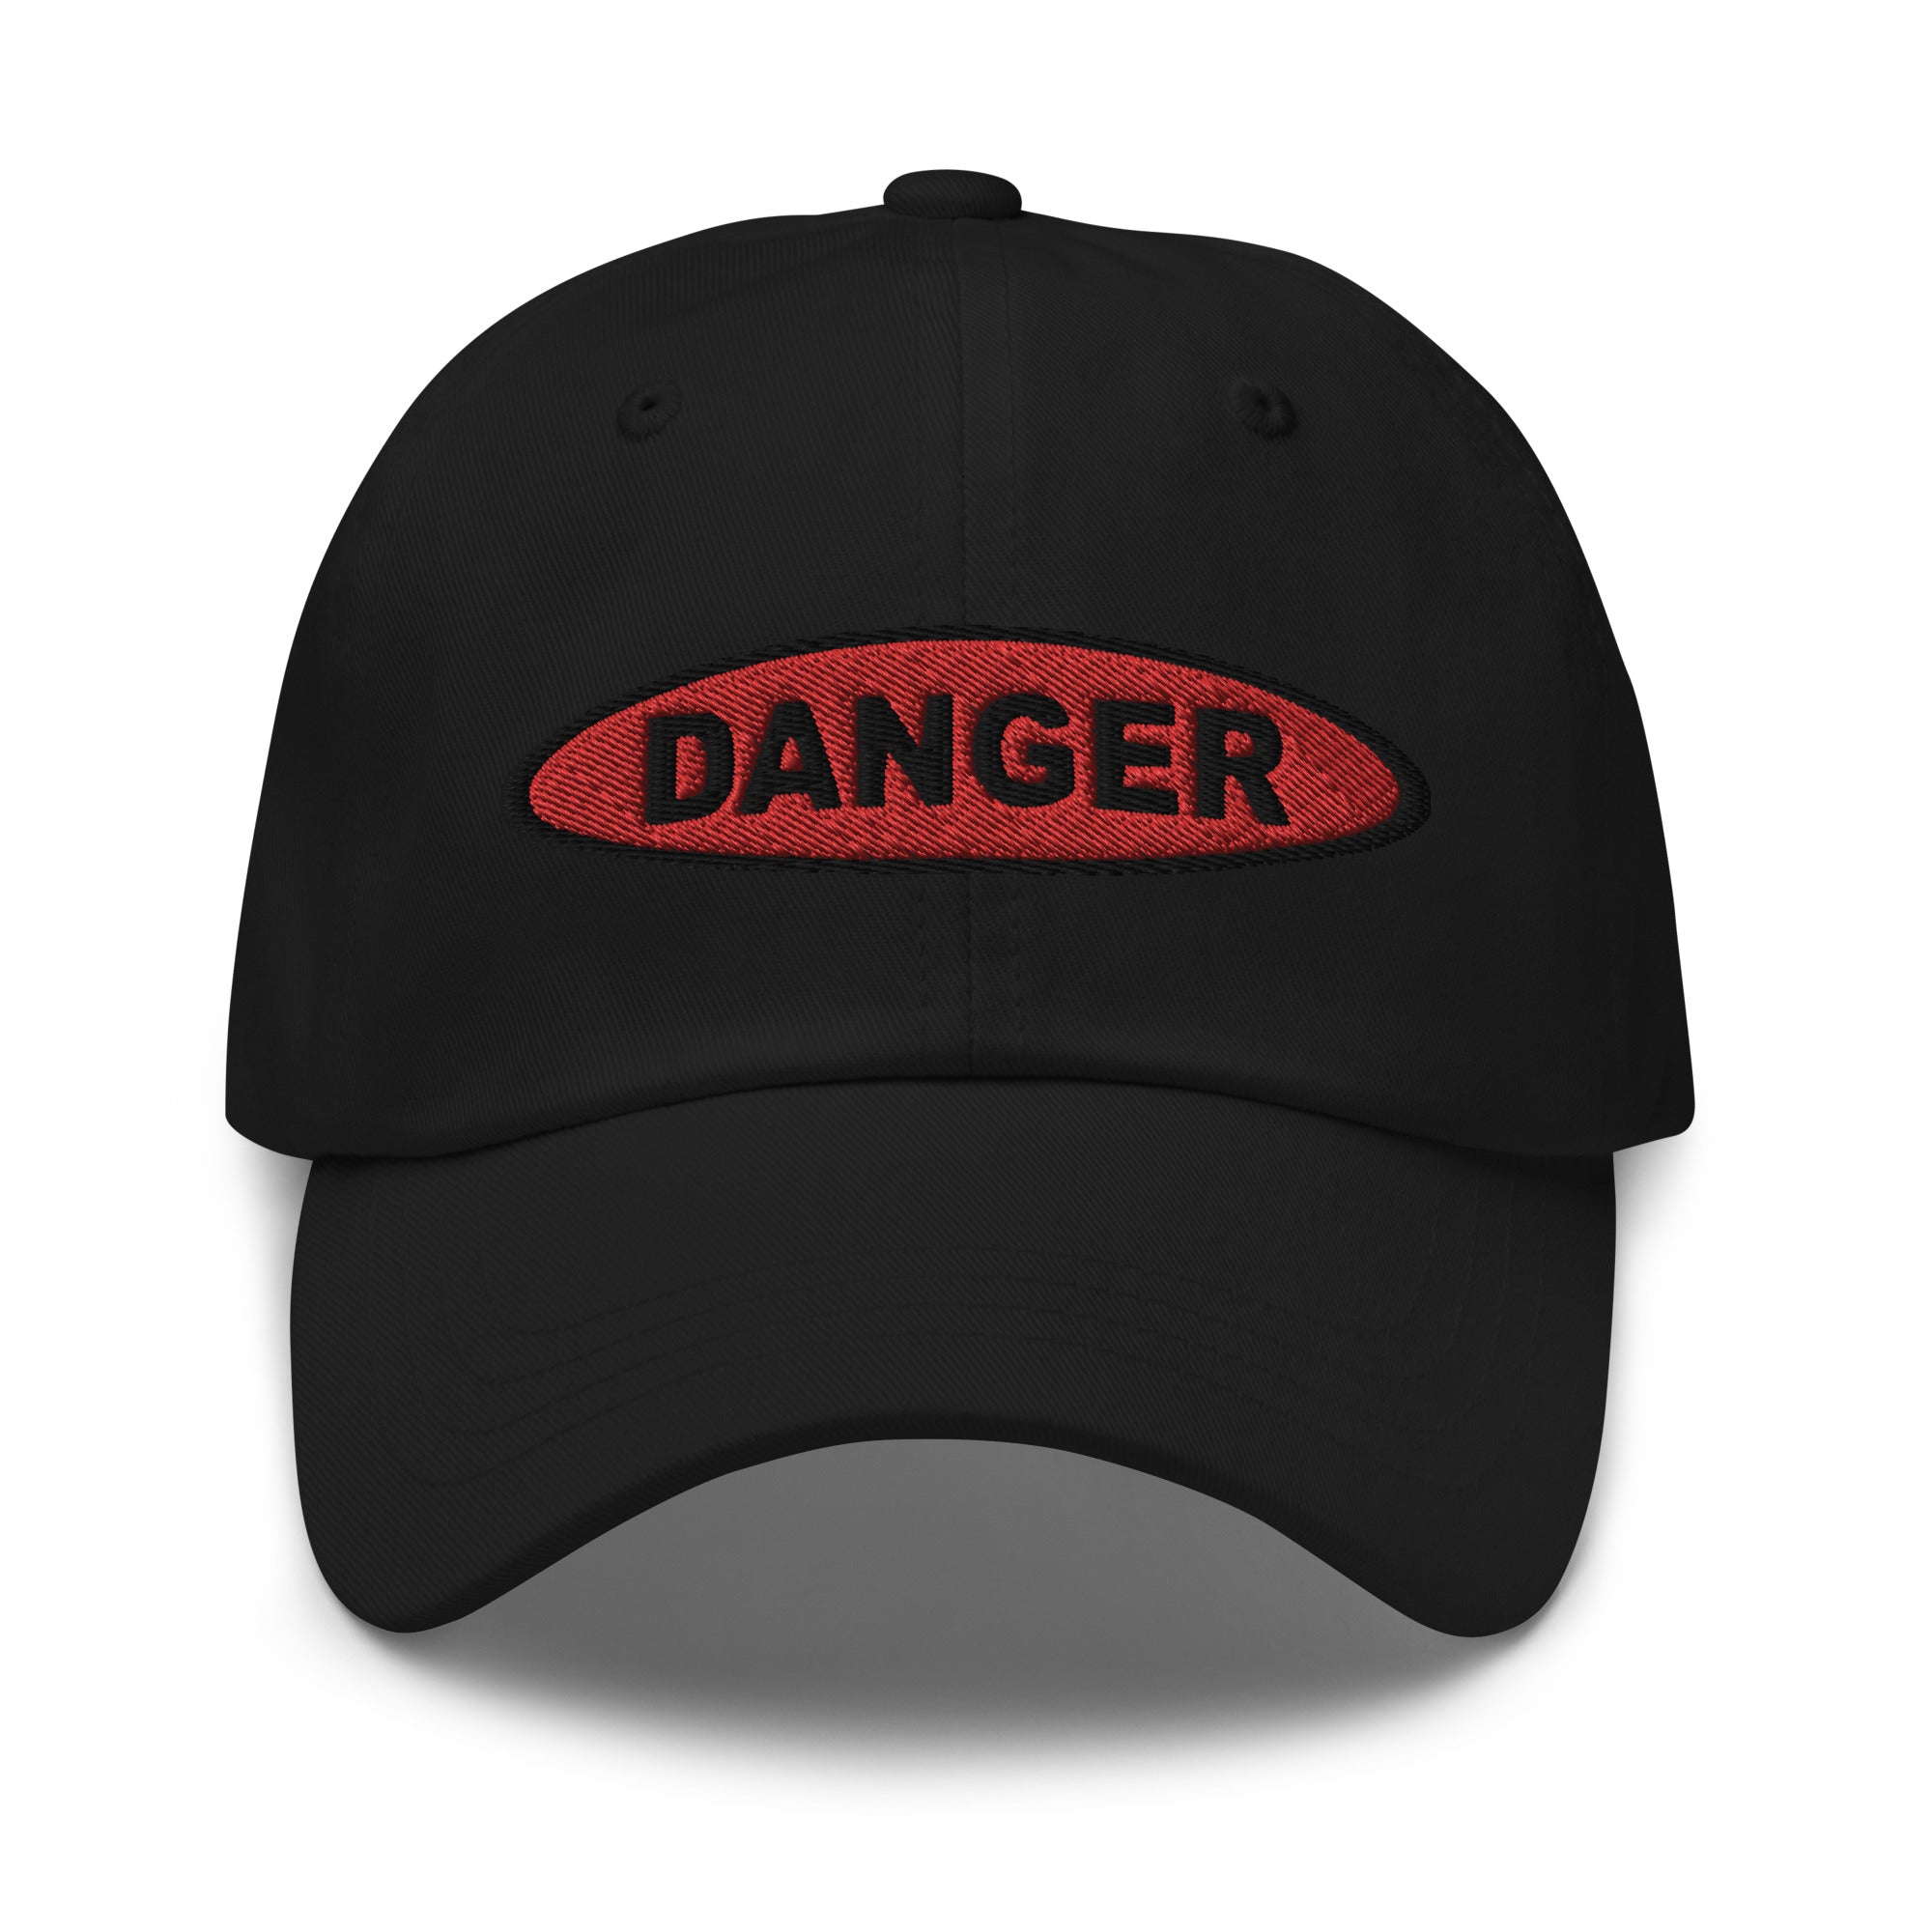 Danger Sign in Red Embroidered Baseball Cap Warning Dad hat - Edge of Life Designs